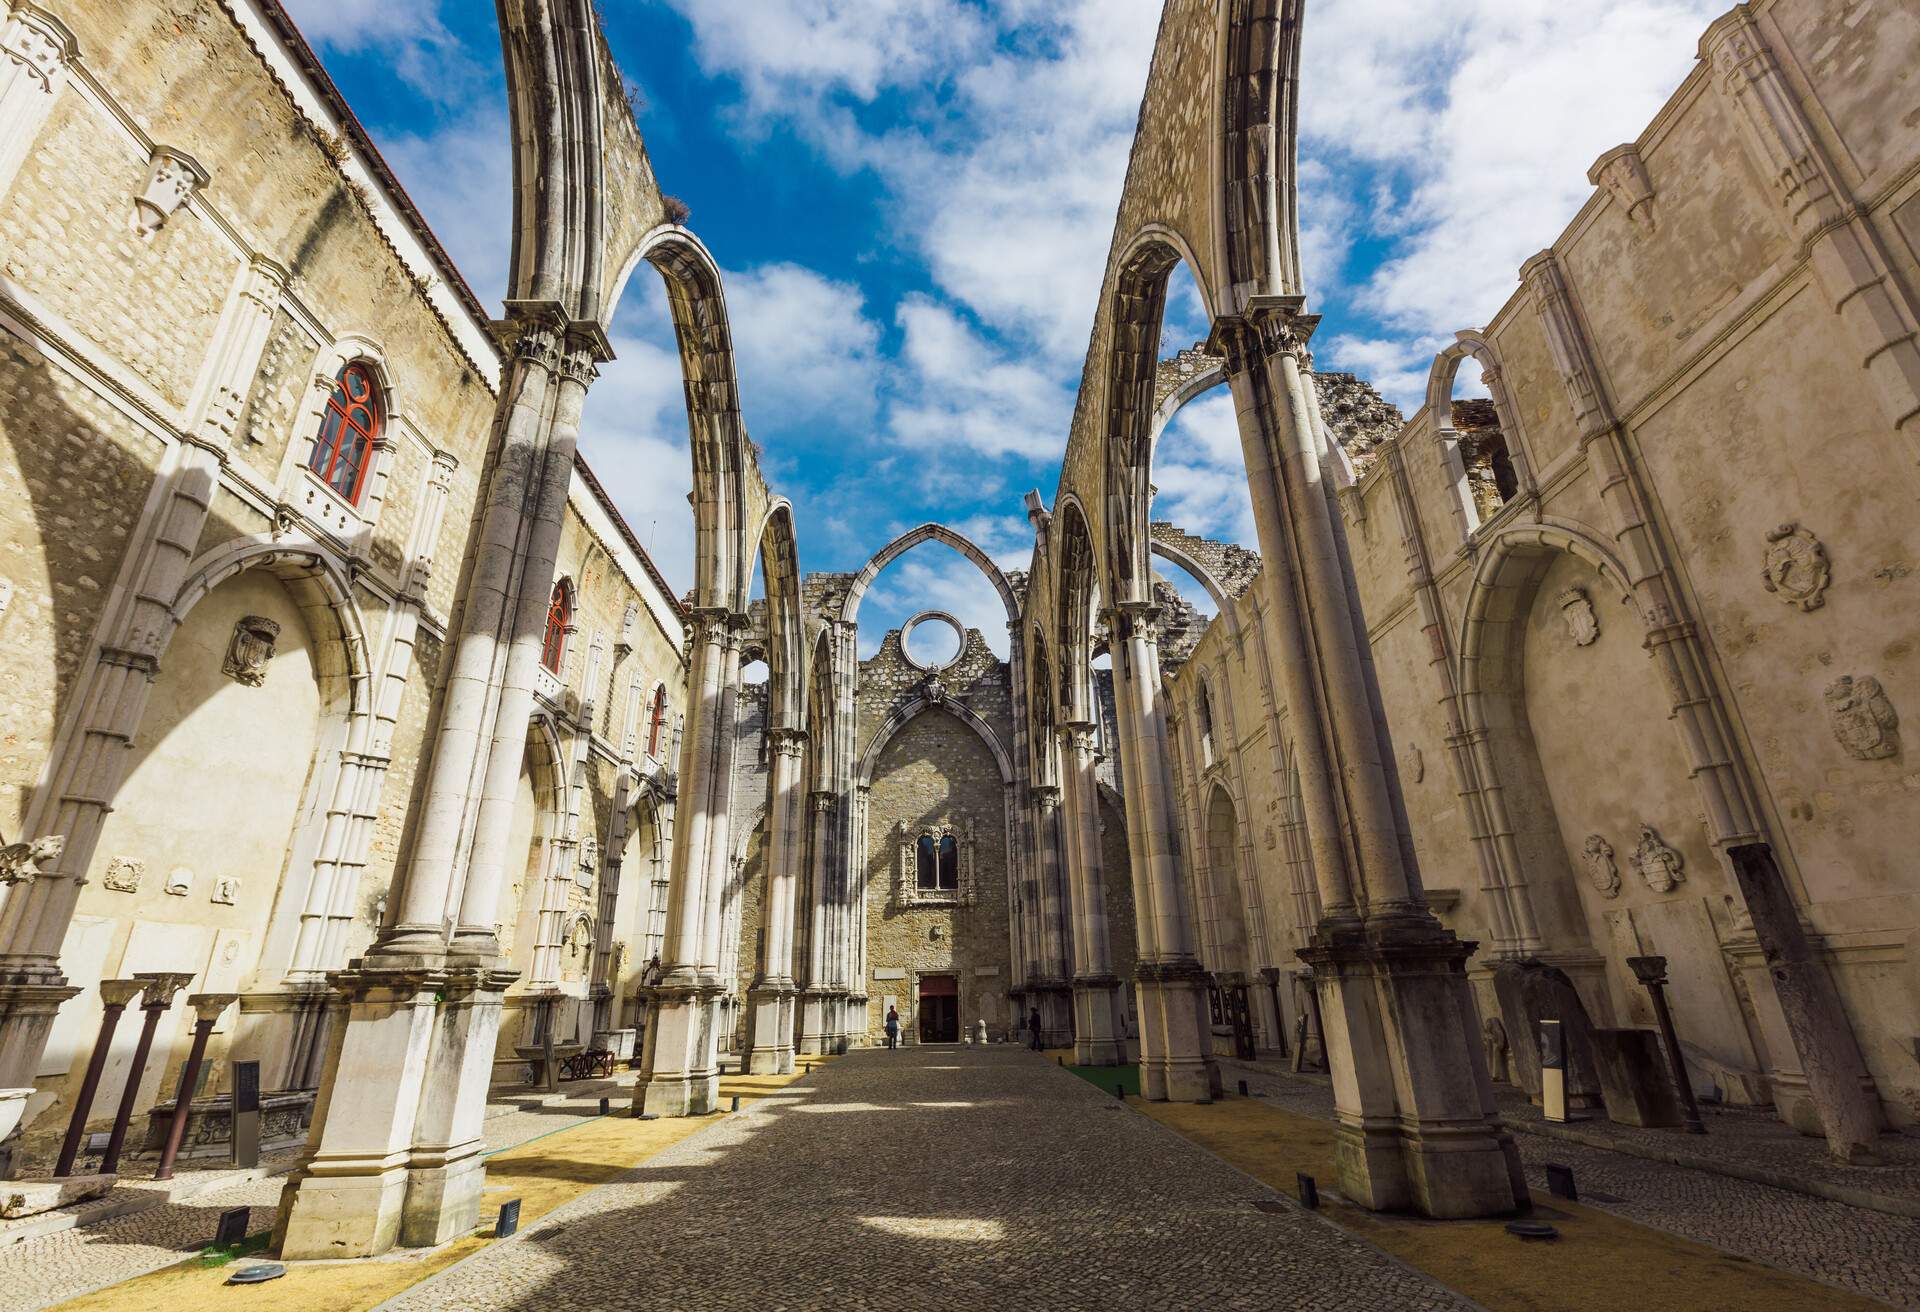 The old convent of Carmo in Lisbon with an open view to the sky